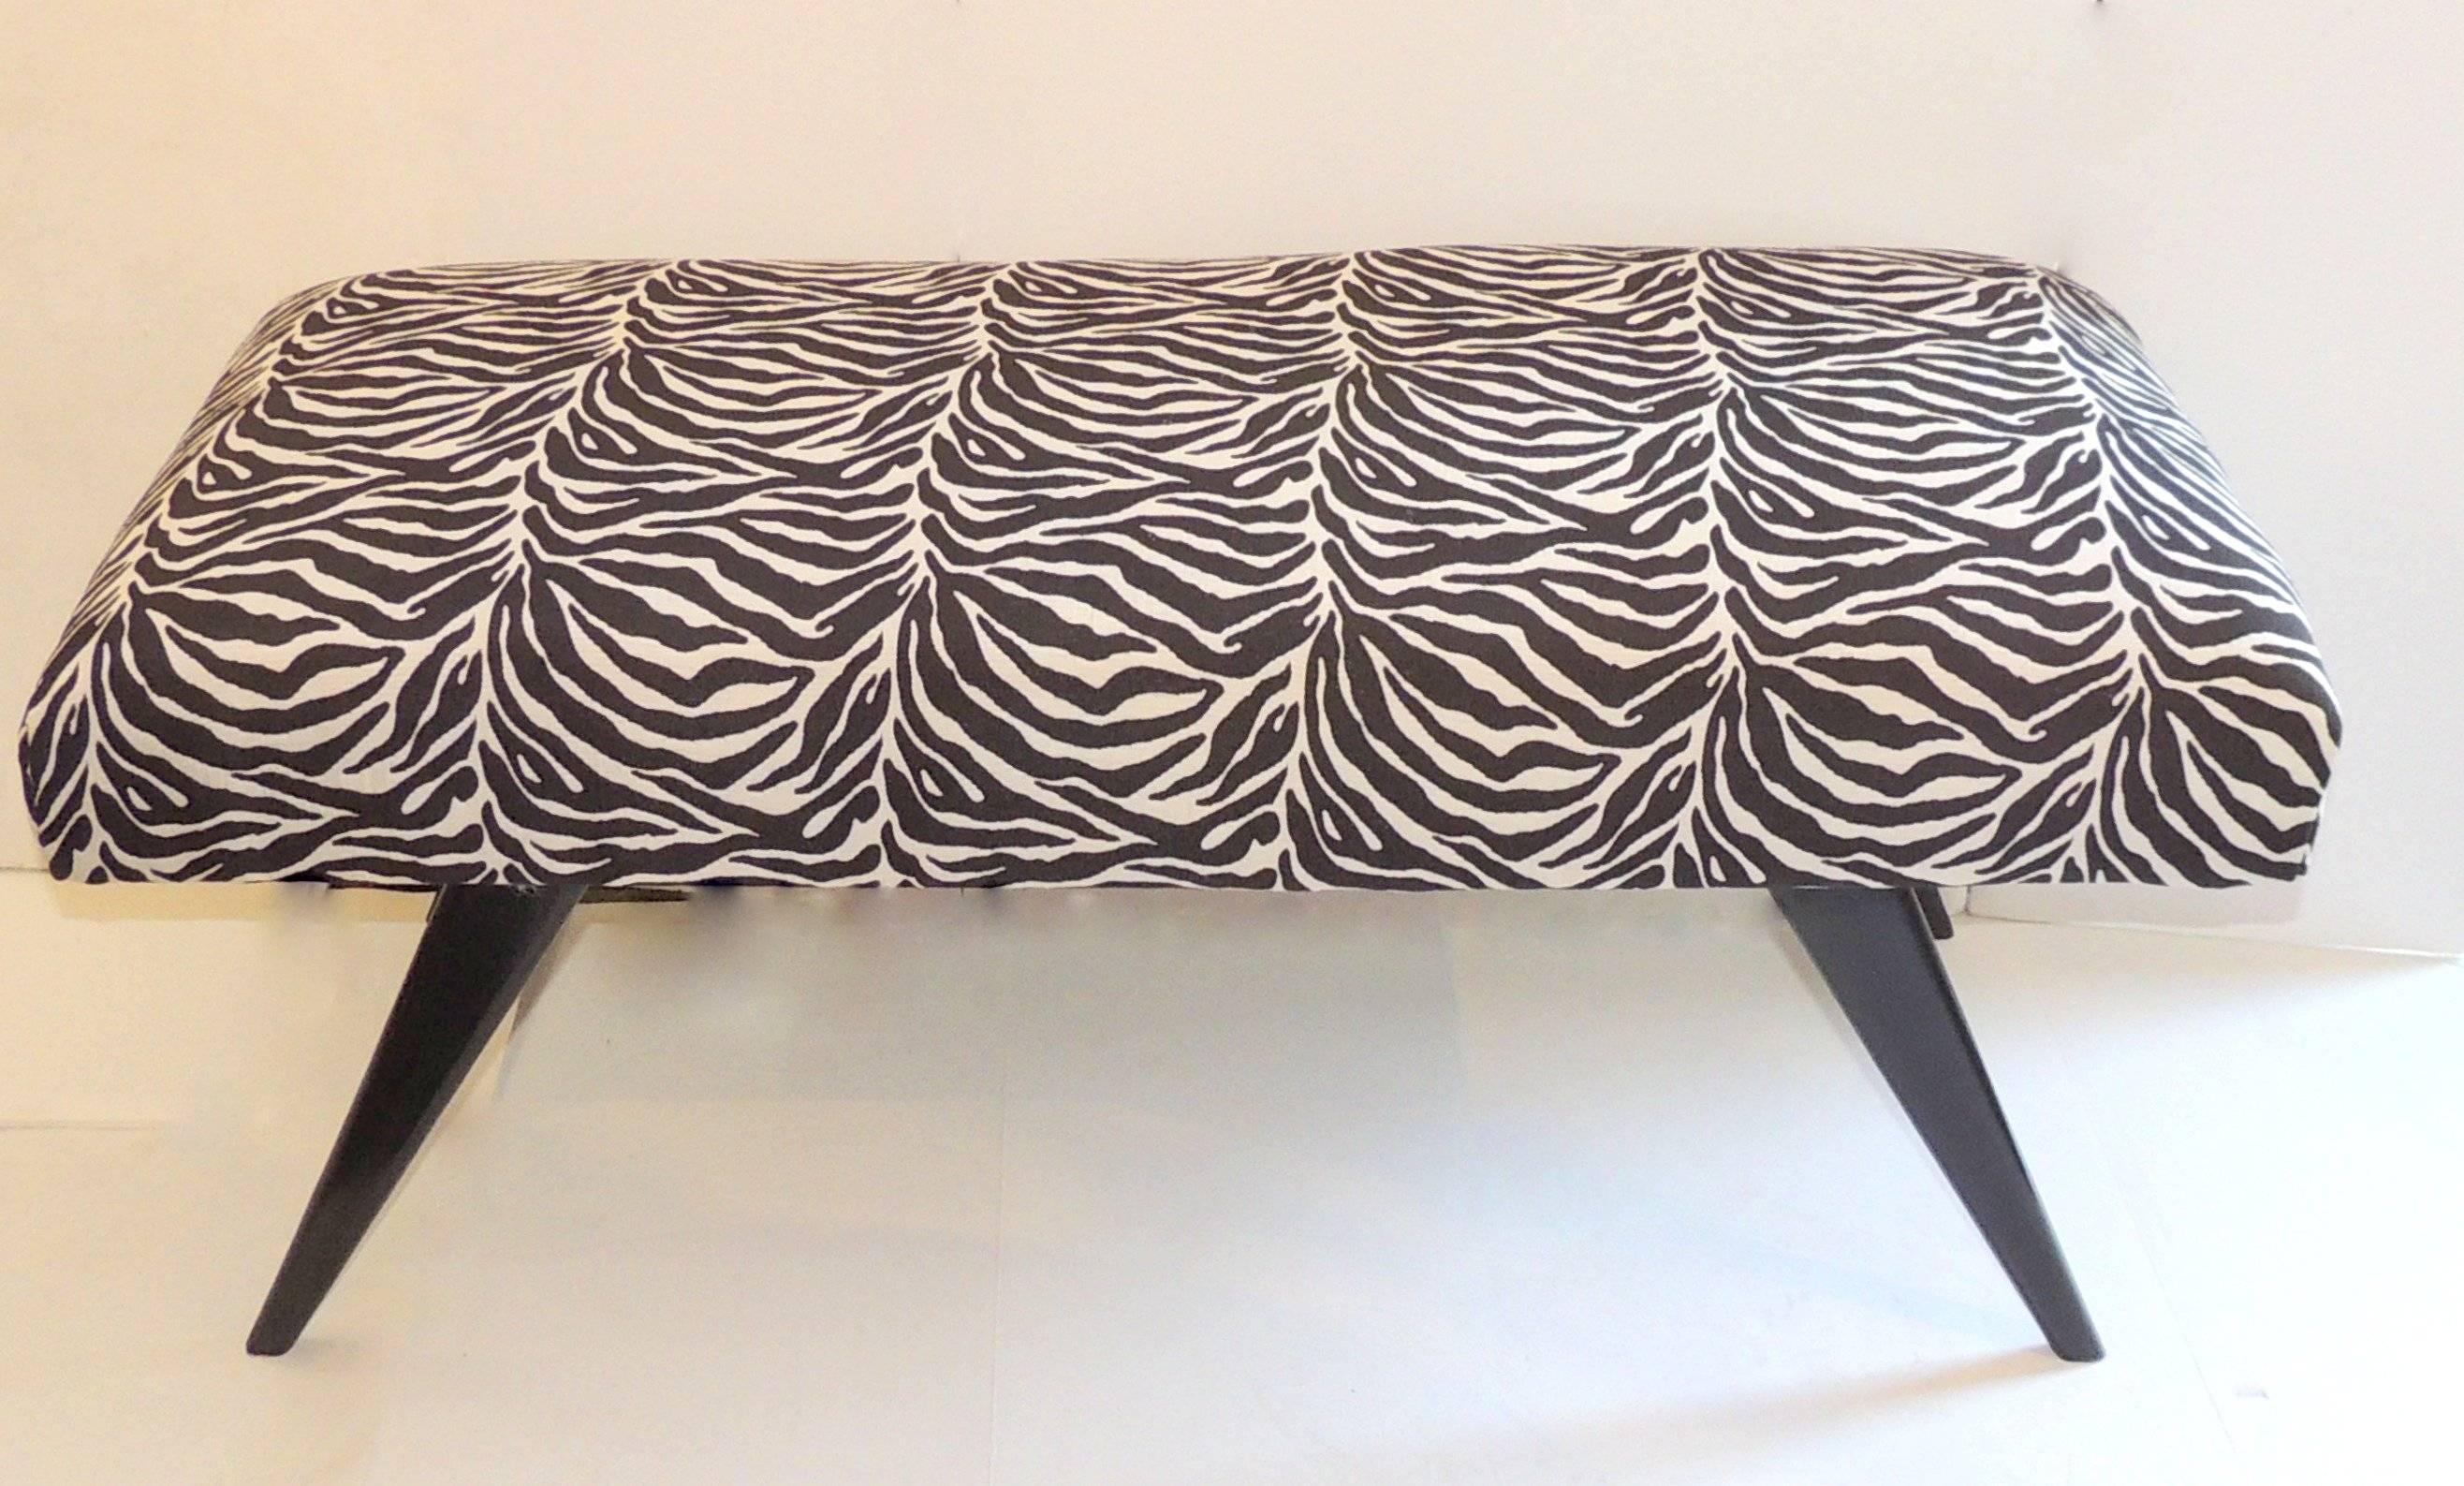 A wonderful sleek pair of black lacquered benches with zebra pattern upholstery. In the style of Jansen Mid-Century Modern.
Attributed to Jacques Tournus.
Measures: 17.5